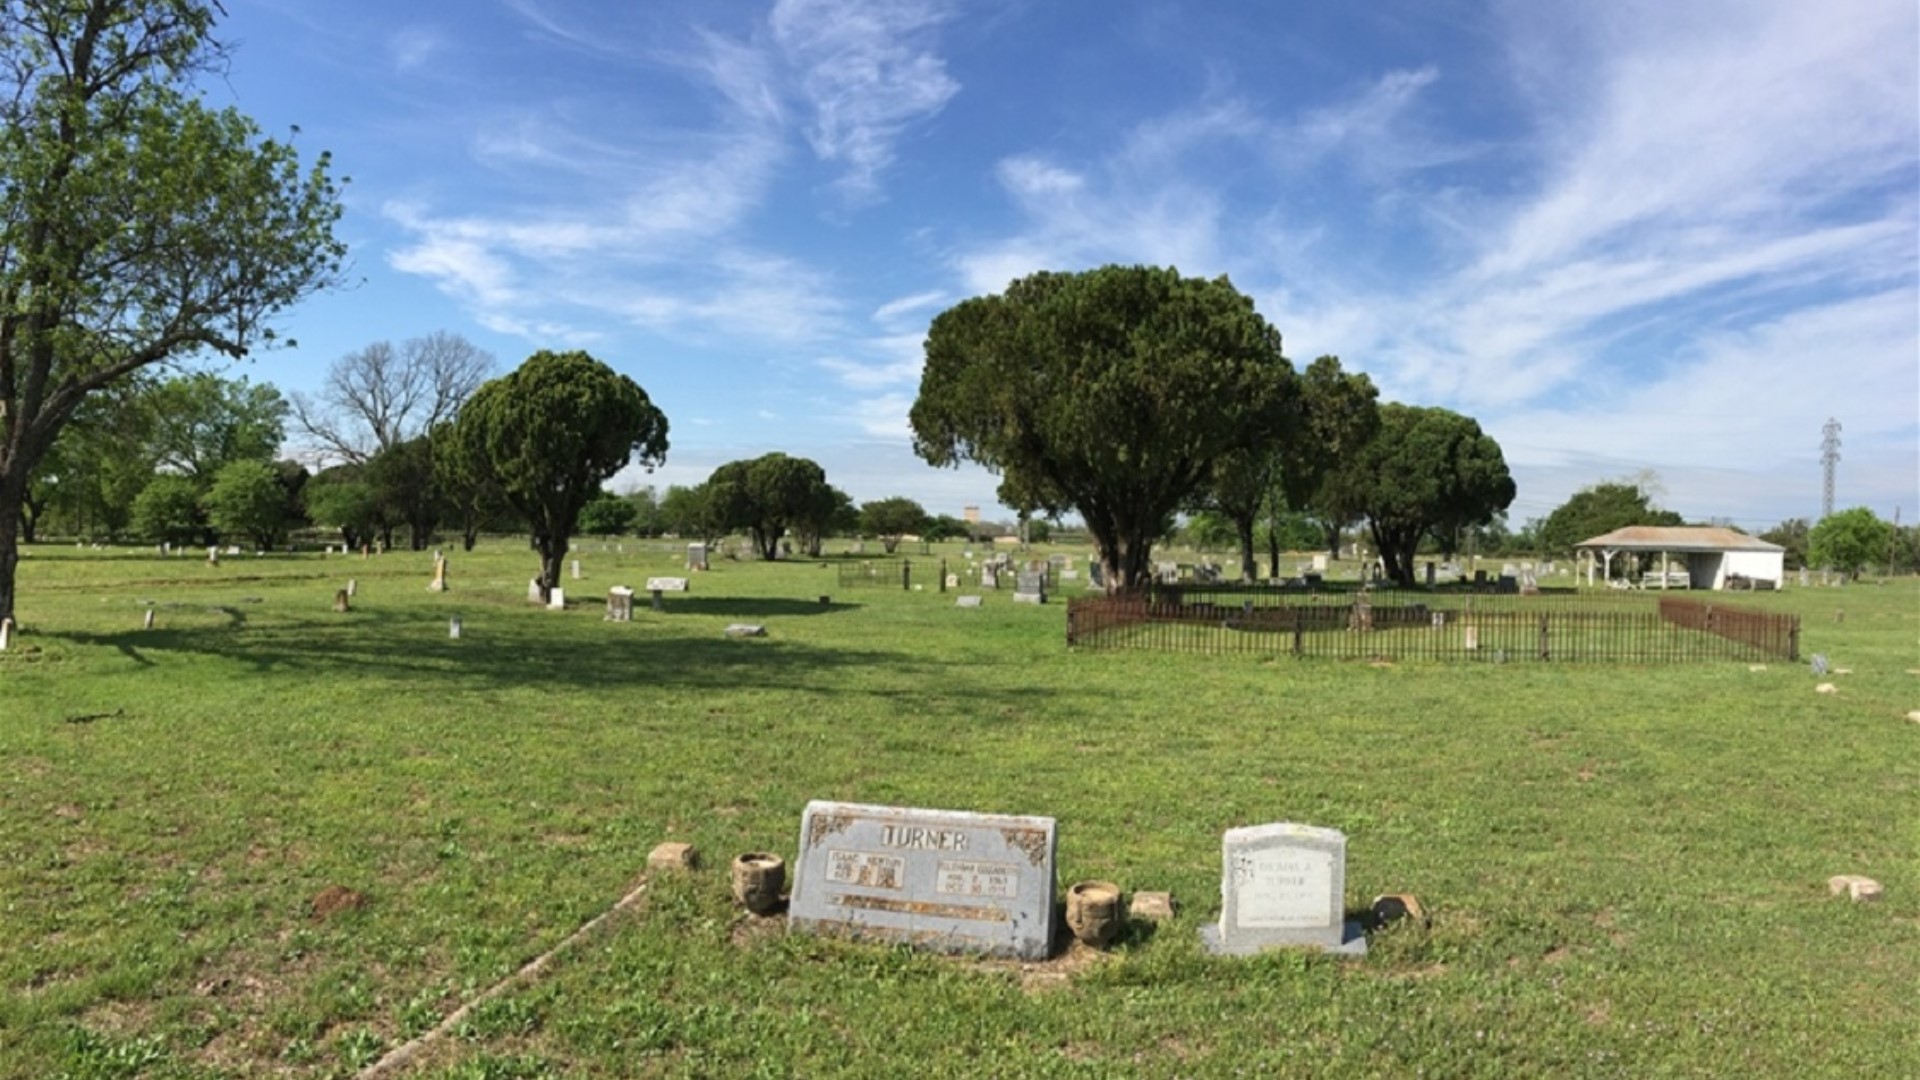 Greenwood is the second oldest cemetery in Waco.